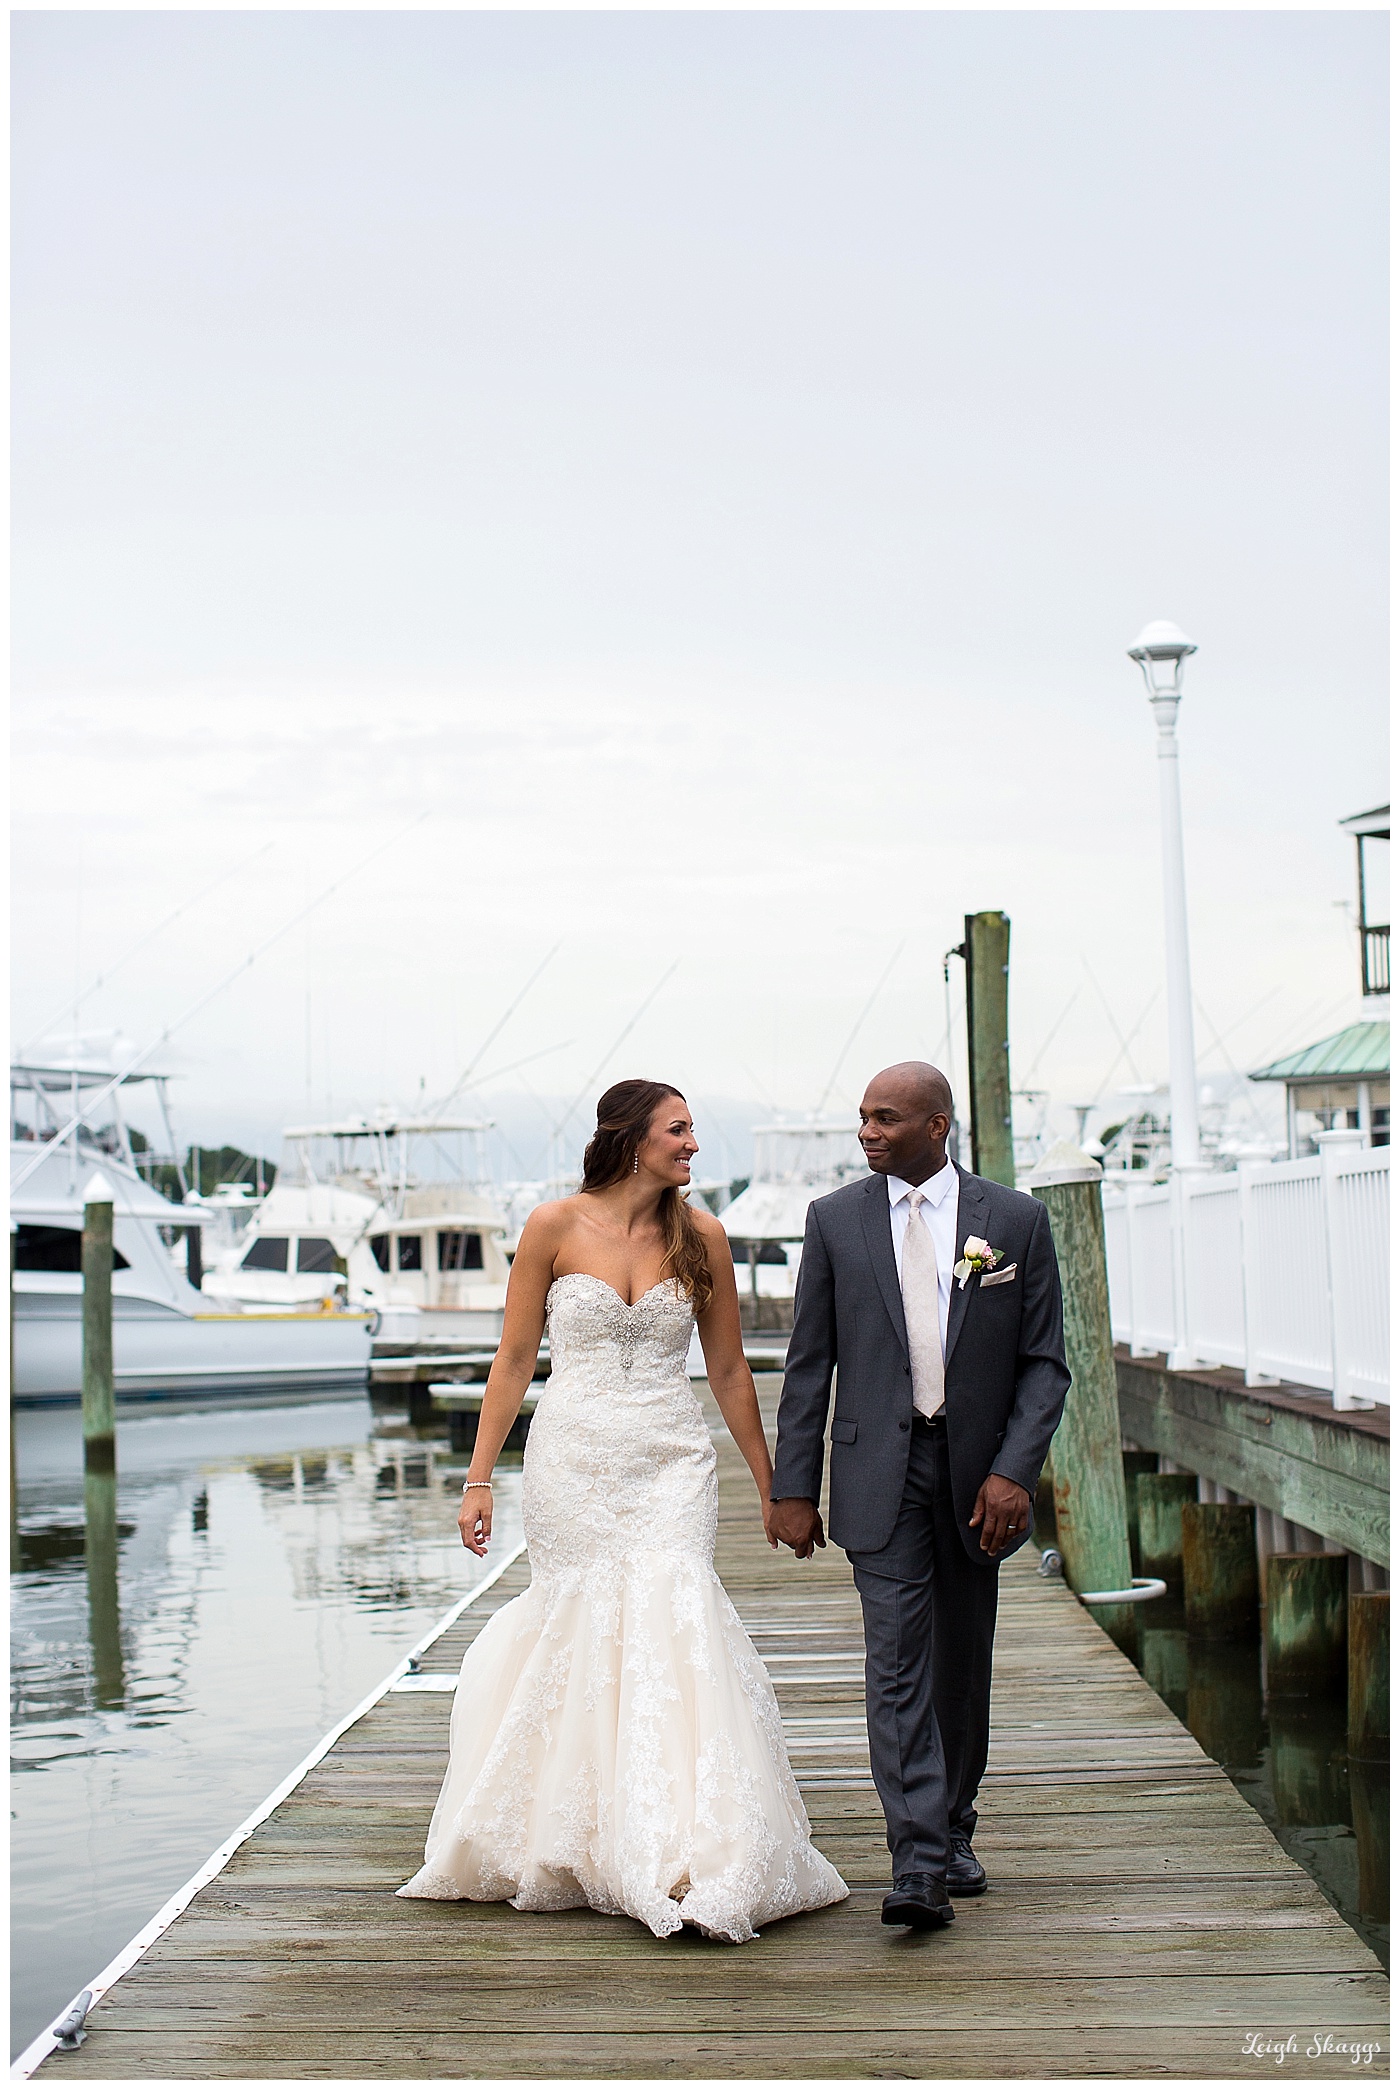 Jessica & Oliver are Married!  Loved their Virginia Beach Water Table Wedding!!  